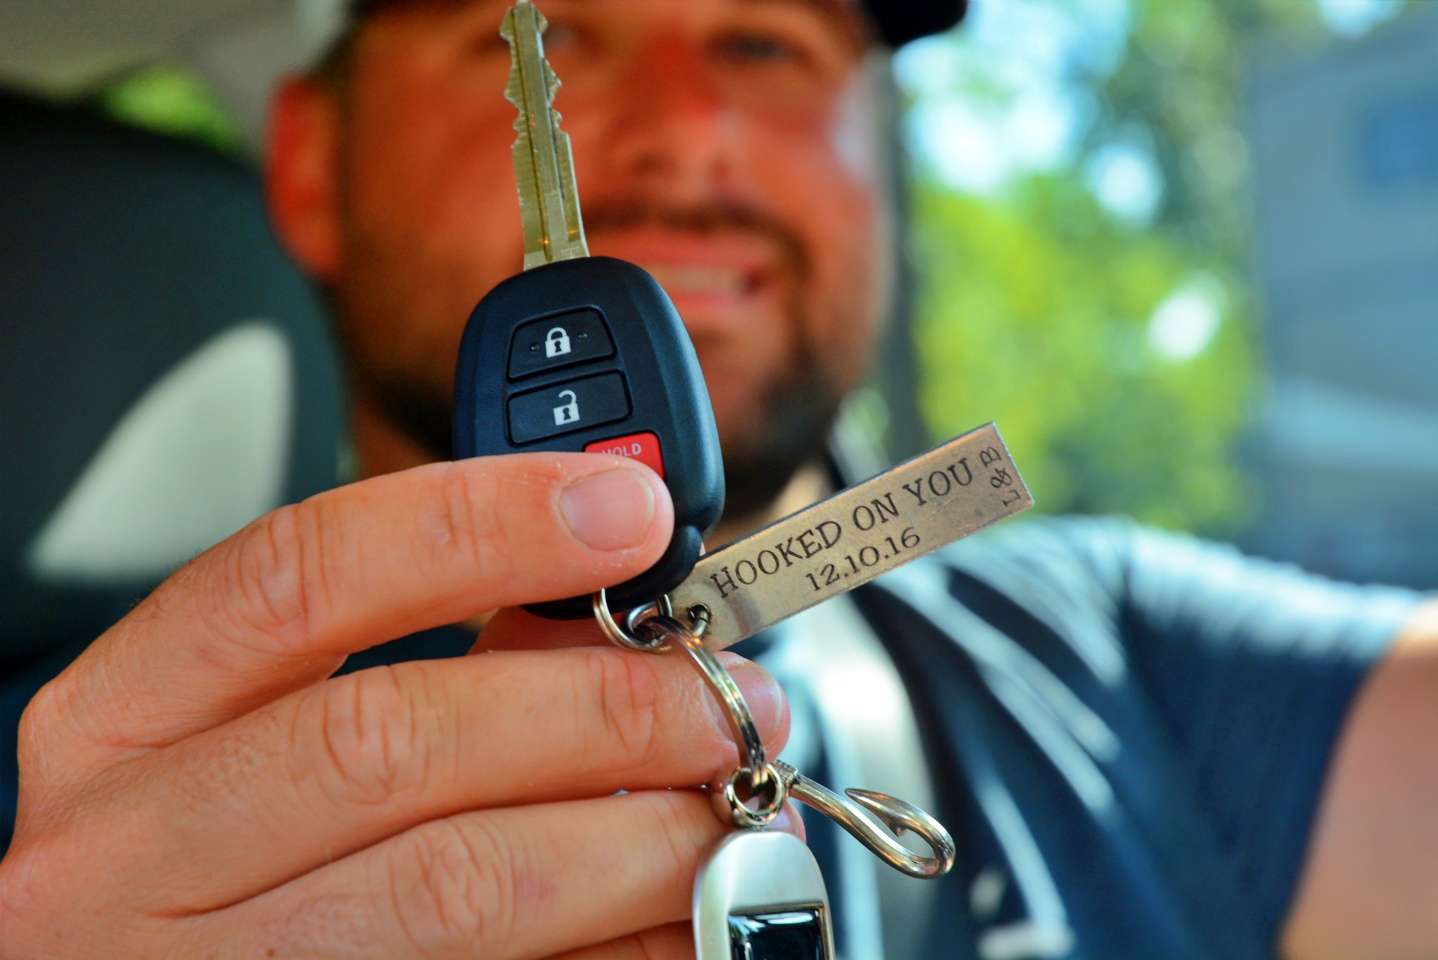 B.A.S.S. Elite Series pro Brock Mosley has a key ring with an inscription of his wedding date that was given to him by his wife Leslie. It reminds him that everywhere that he goes there is someone special to go home to.